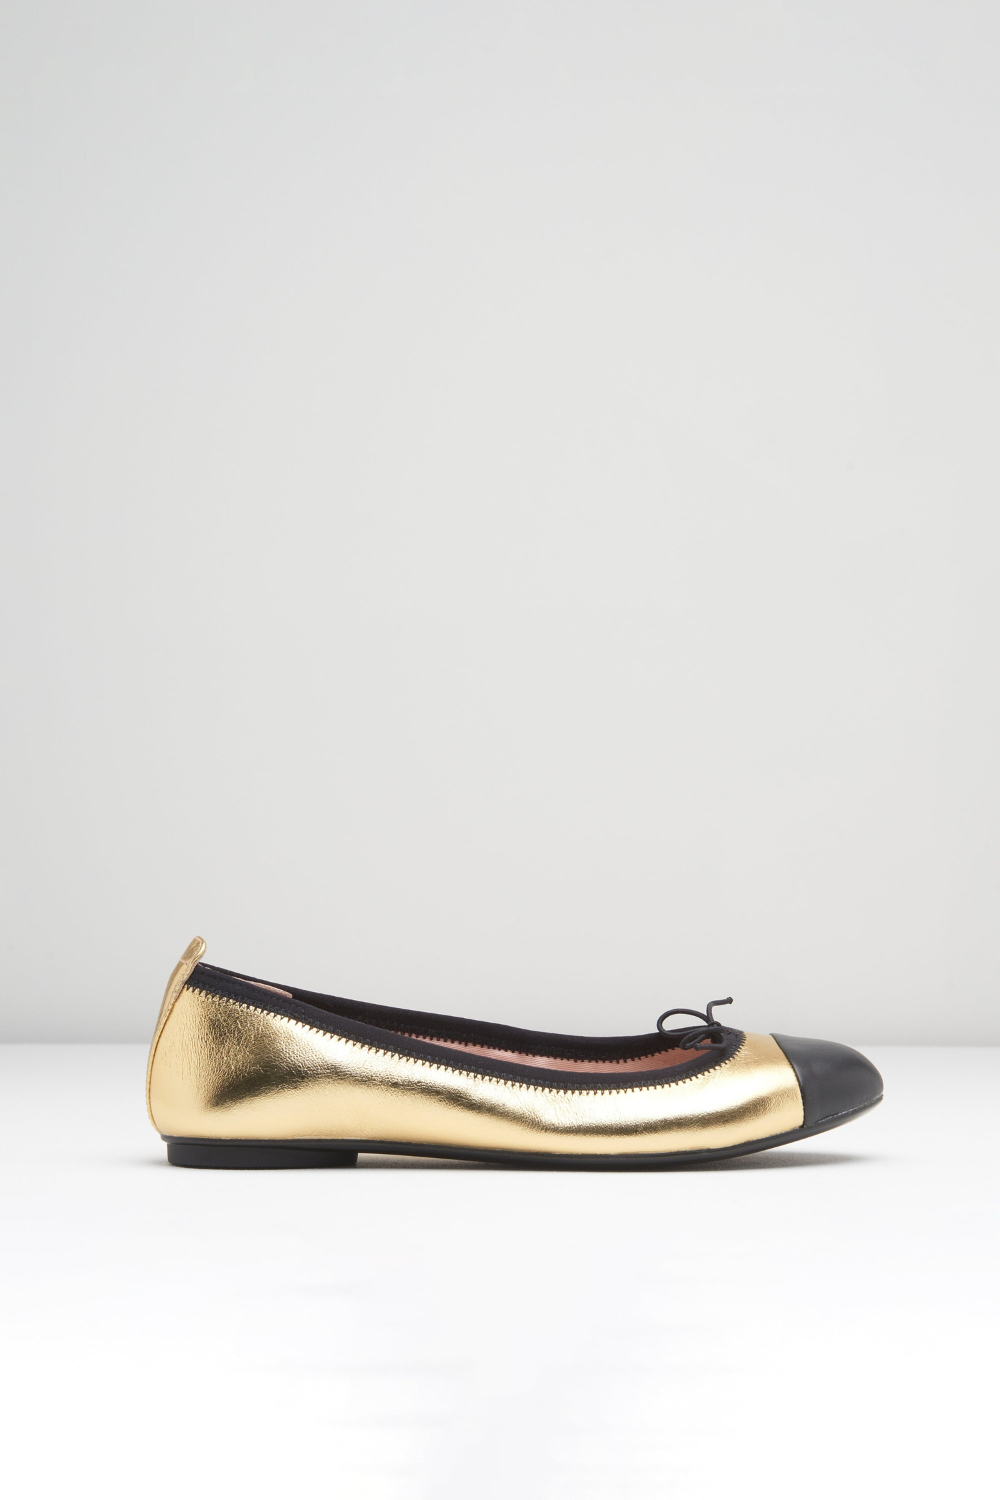 BLOCH Ladies Chara Ballet Pumps, Oro Leather